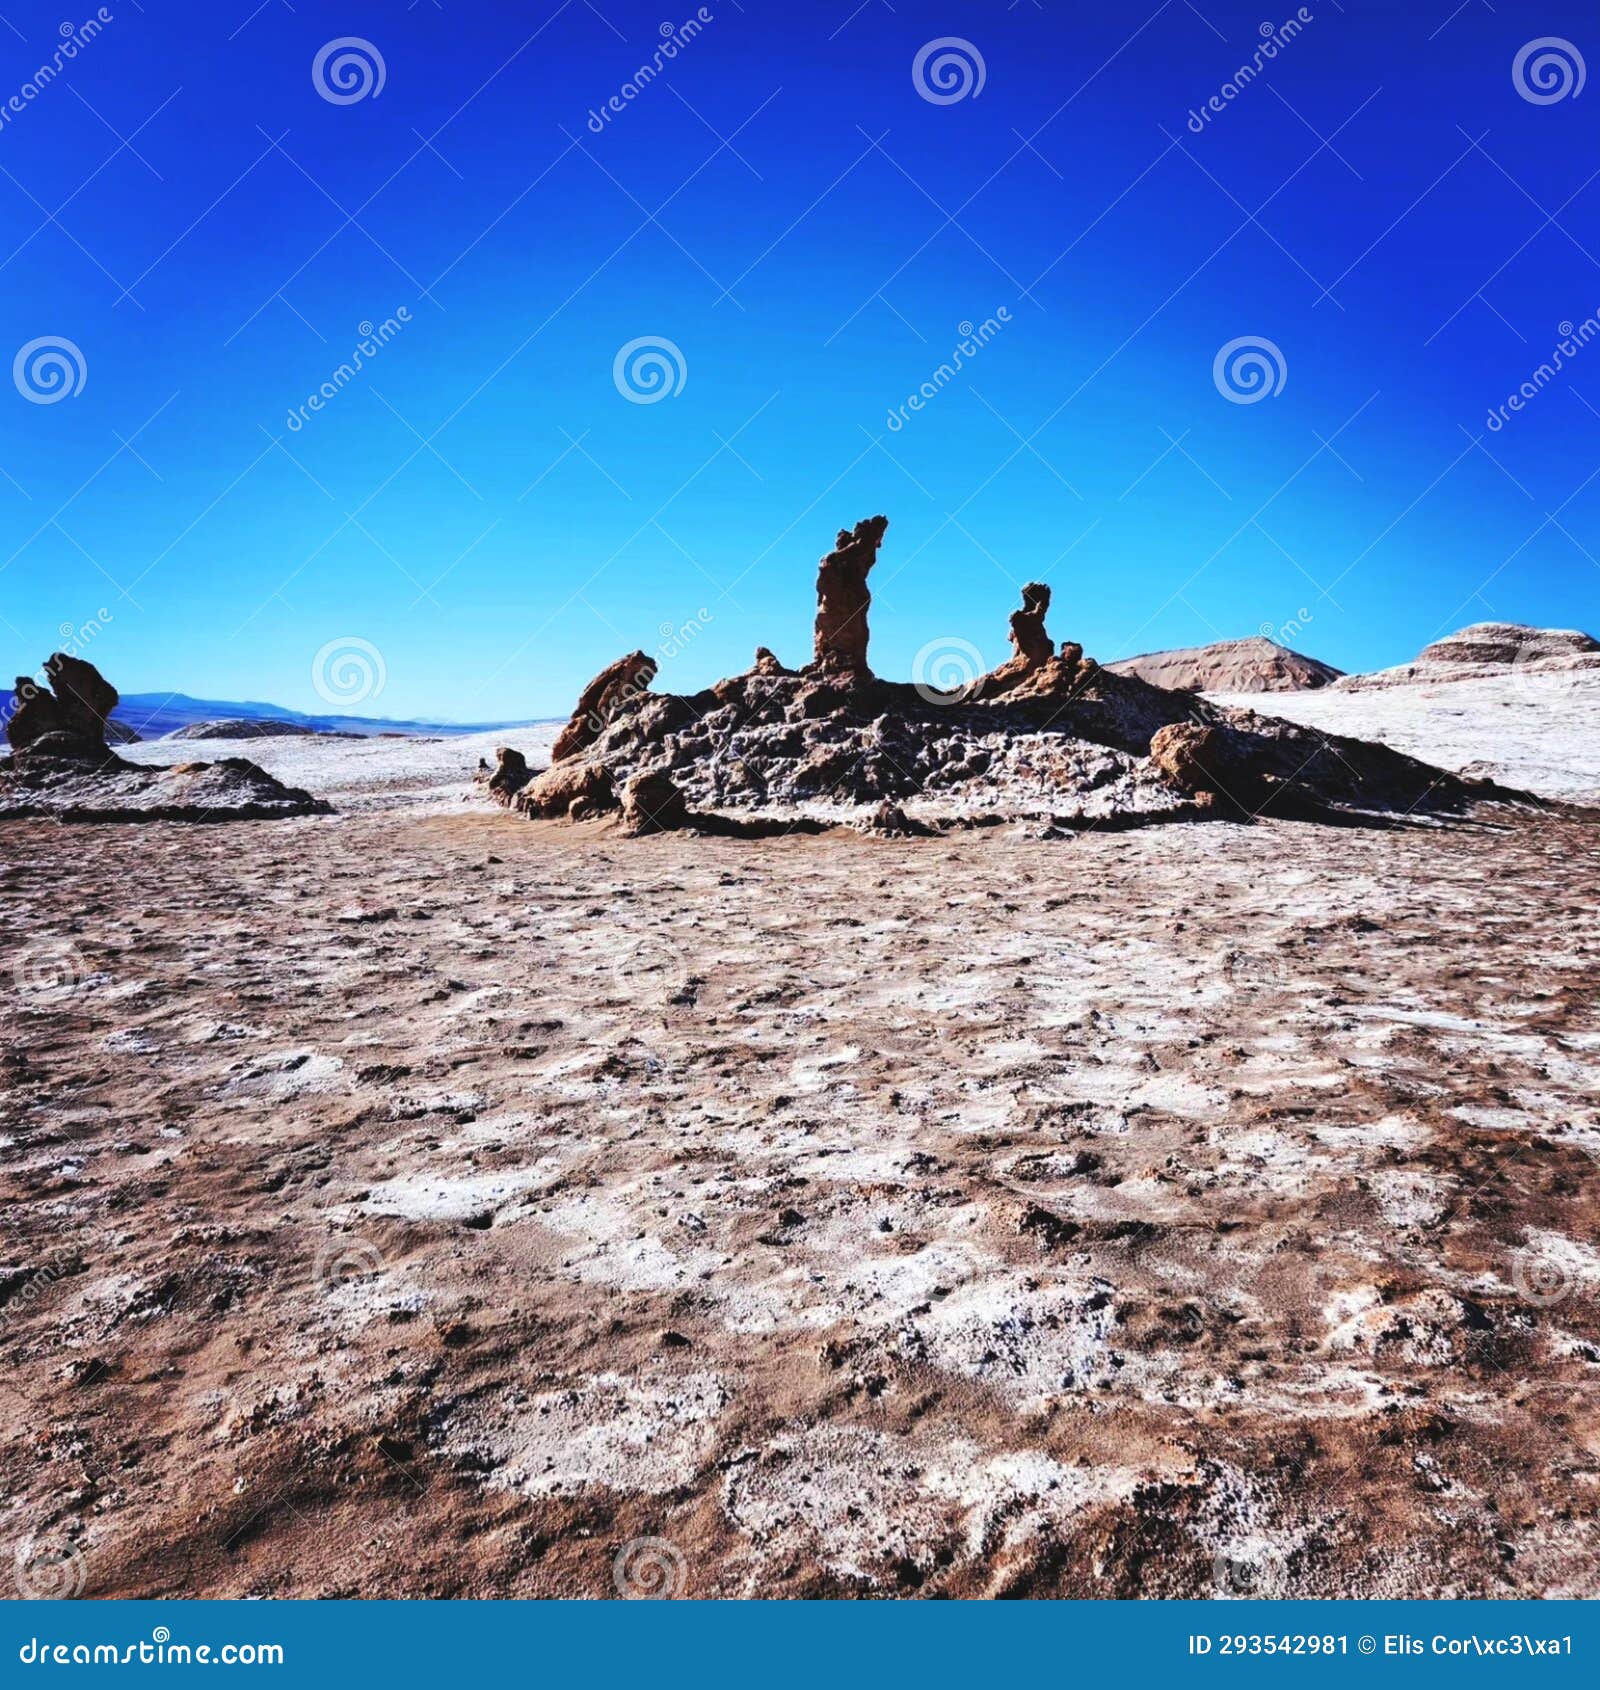 valle de la luna is a natural paradise, located in the middle of the atacama desert.